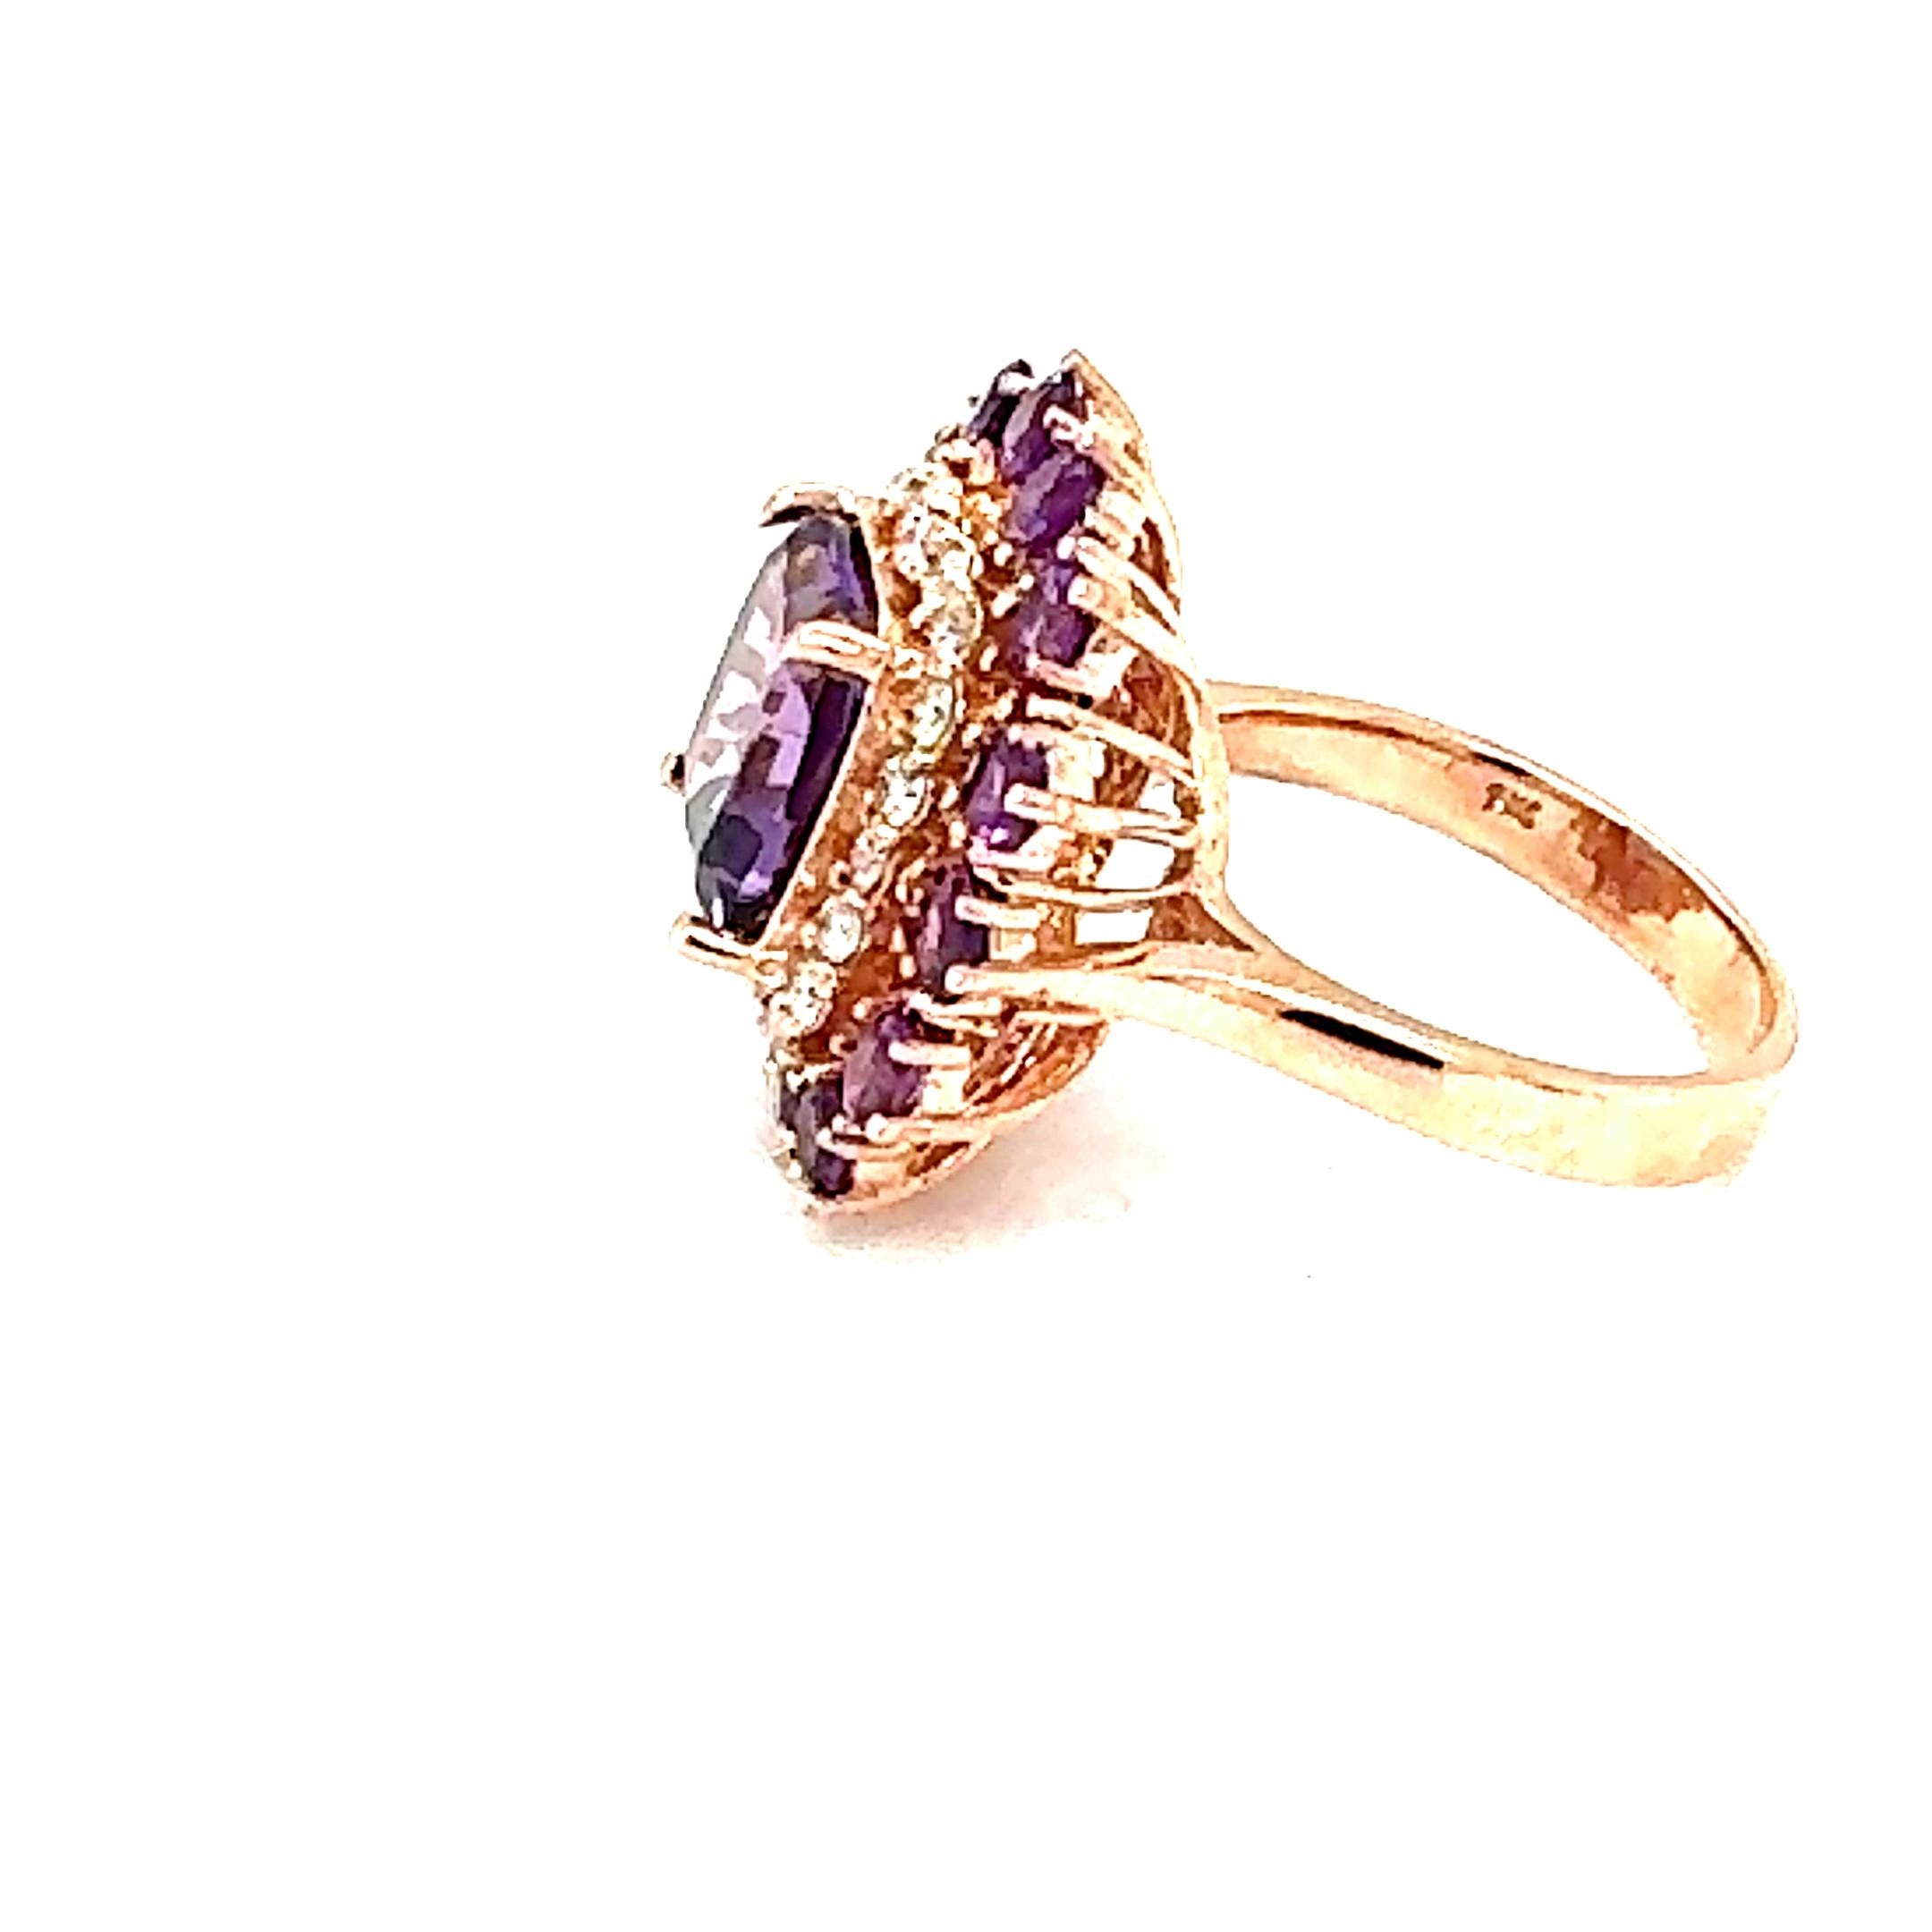 Women's 5.67 Carat Cushion Cut Amethyst Pink Sapphire Diamond Rose Gold Cocktail Ring For Sale